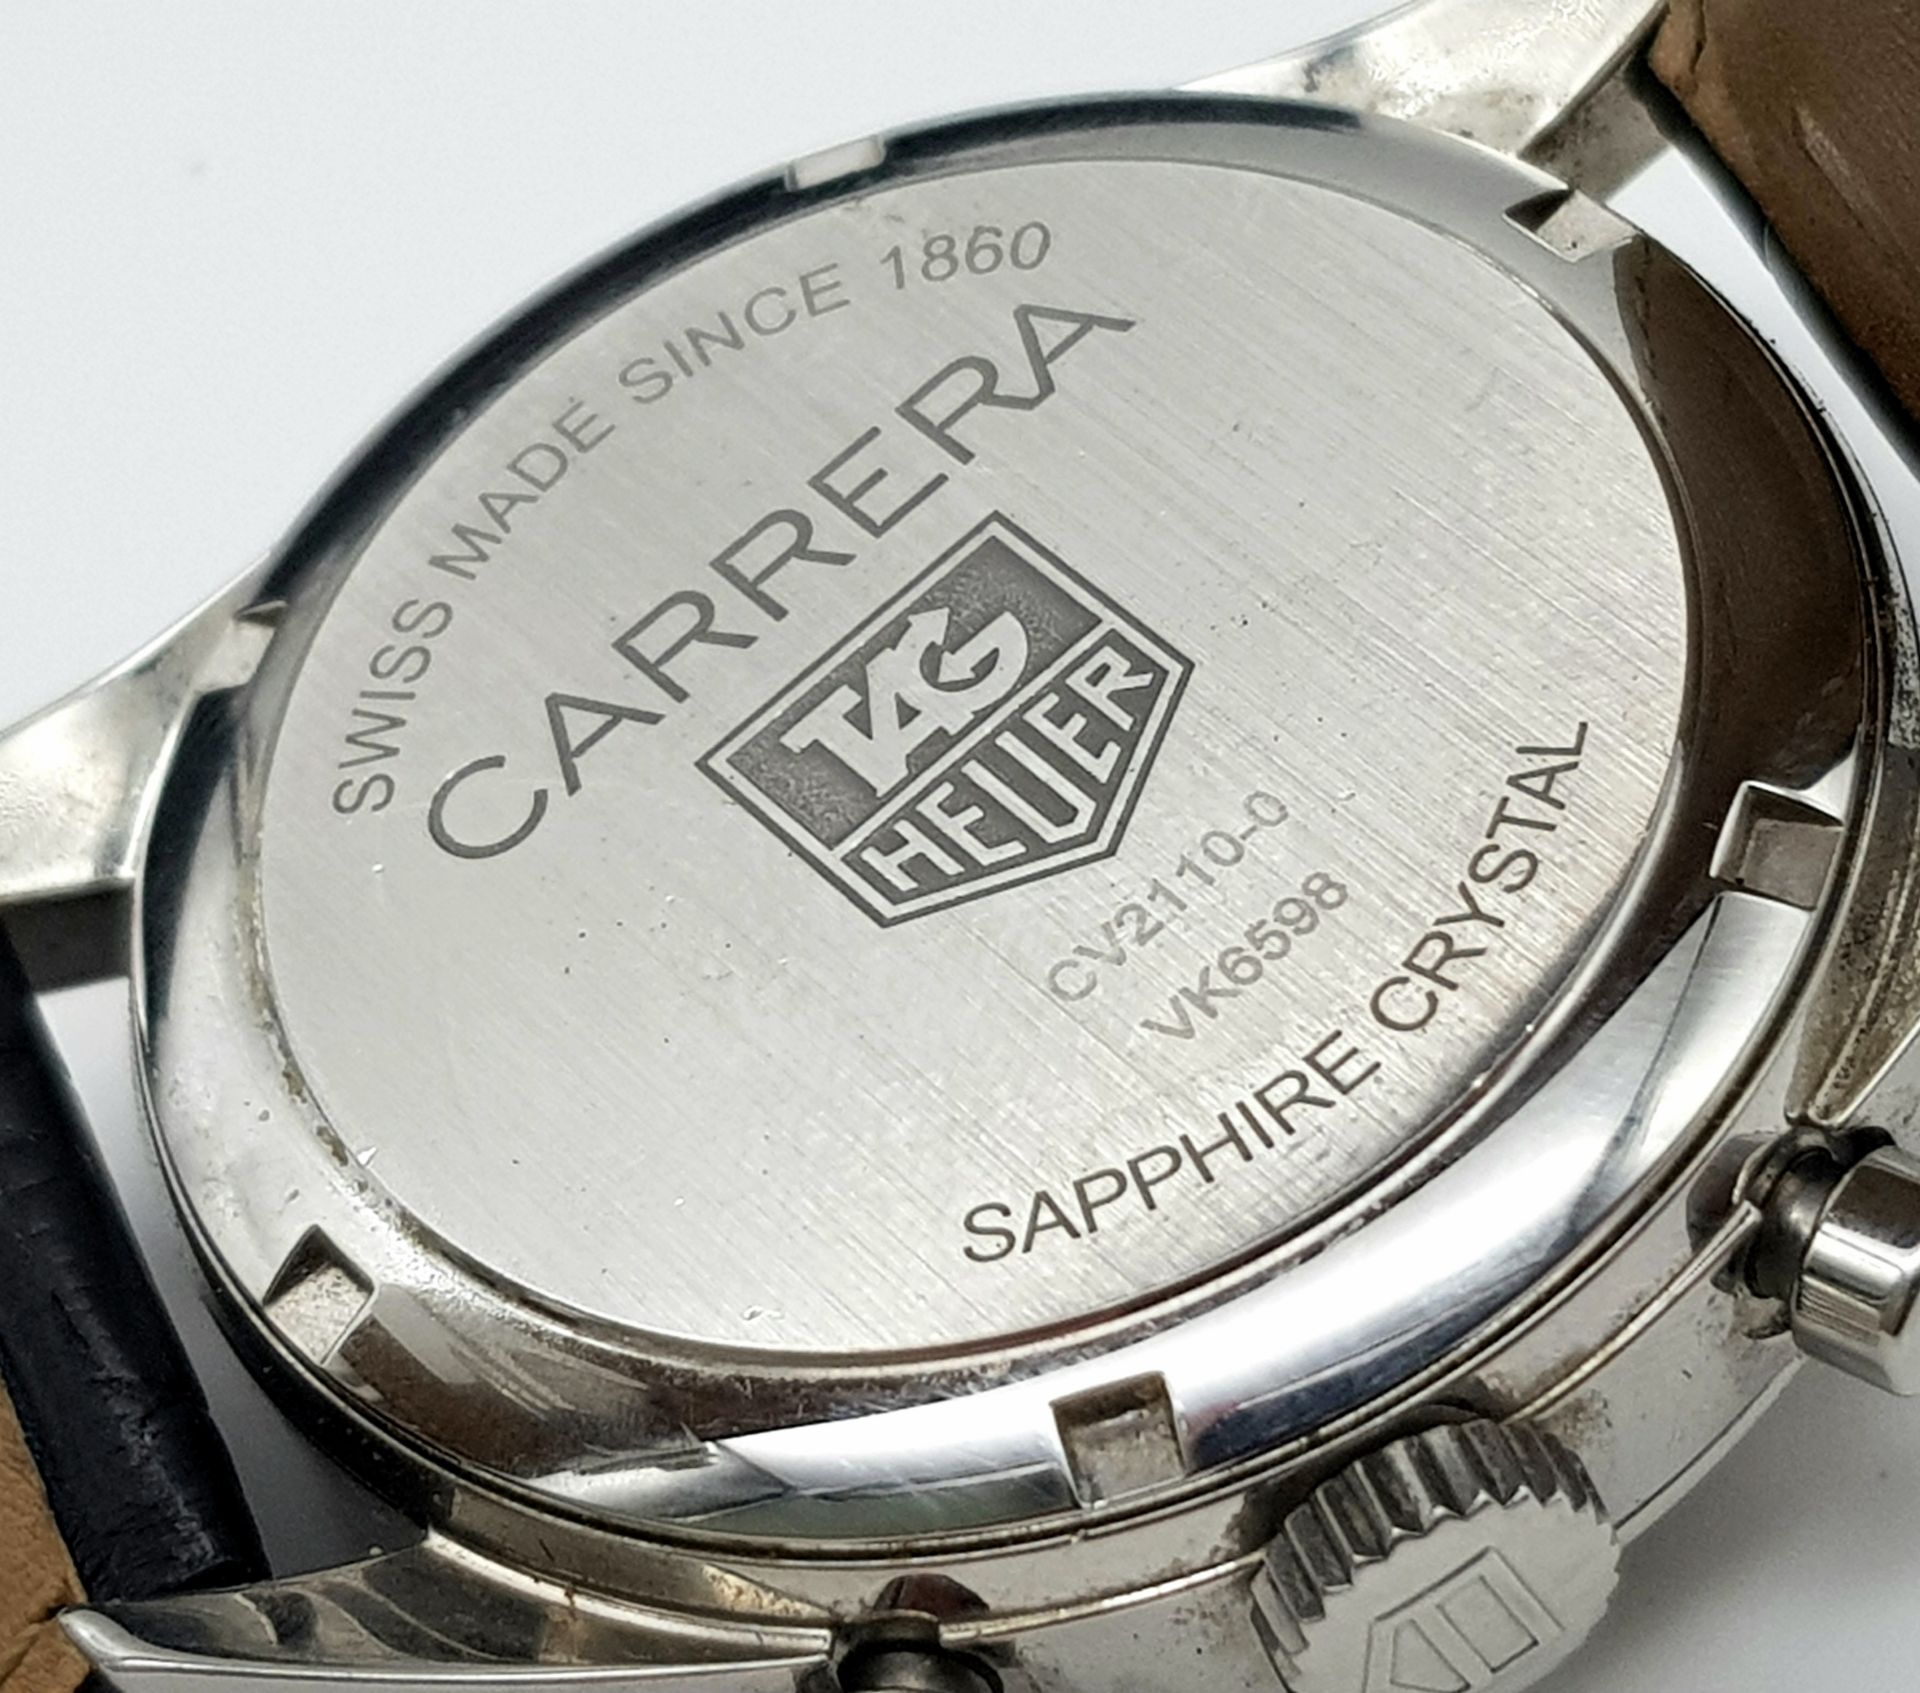 A Tag Heuer Carrera Automatic Chronograph Gents Watch. Black leather Tag strap. Stainless steel case - Bild 6 aus 10